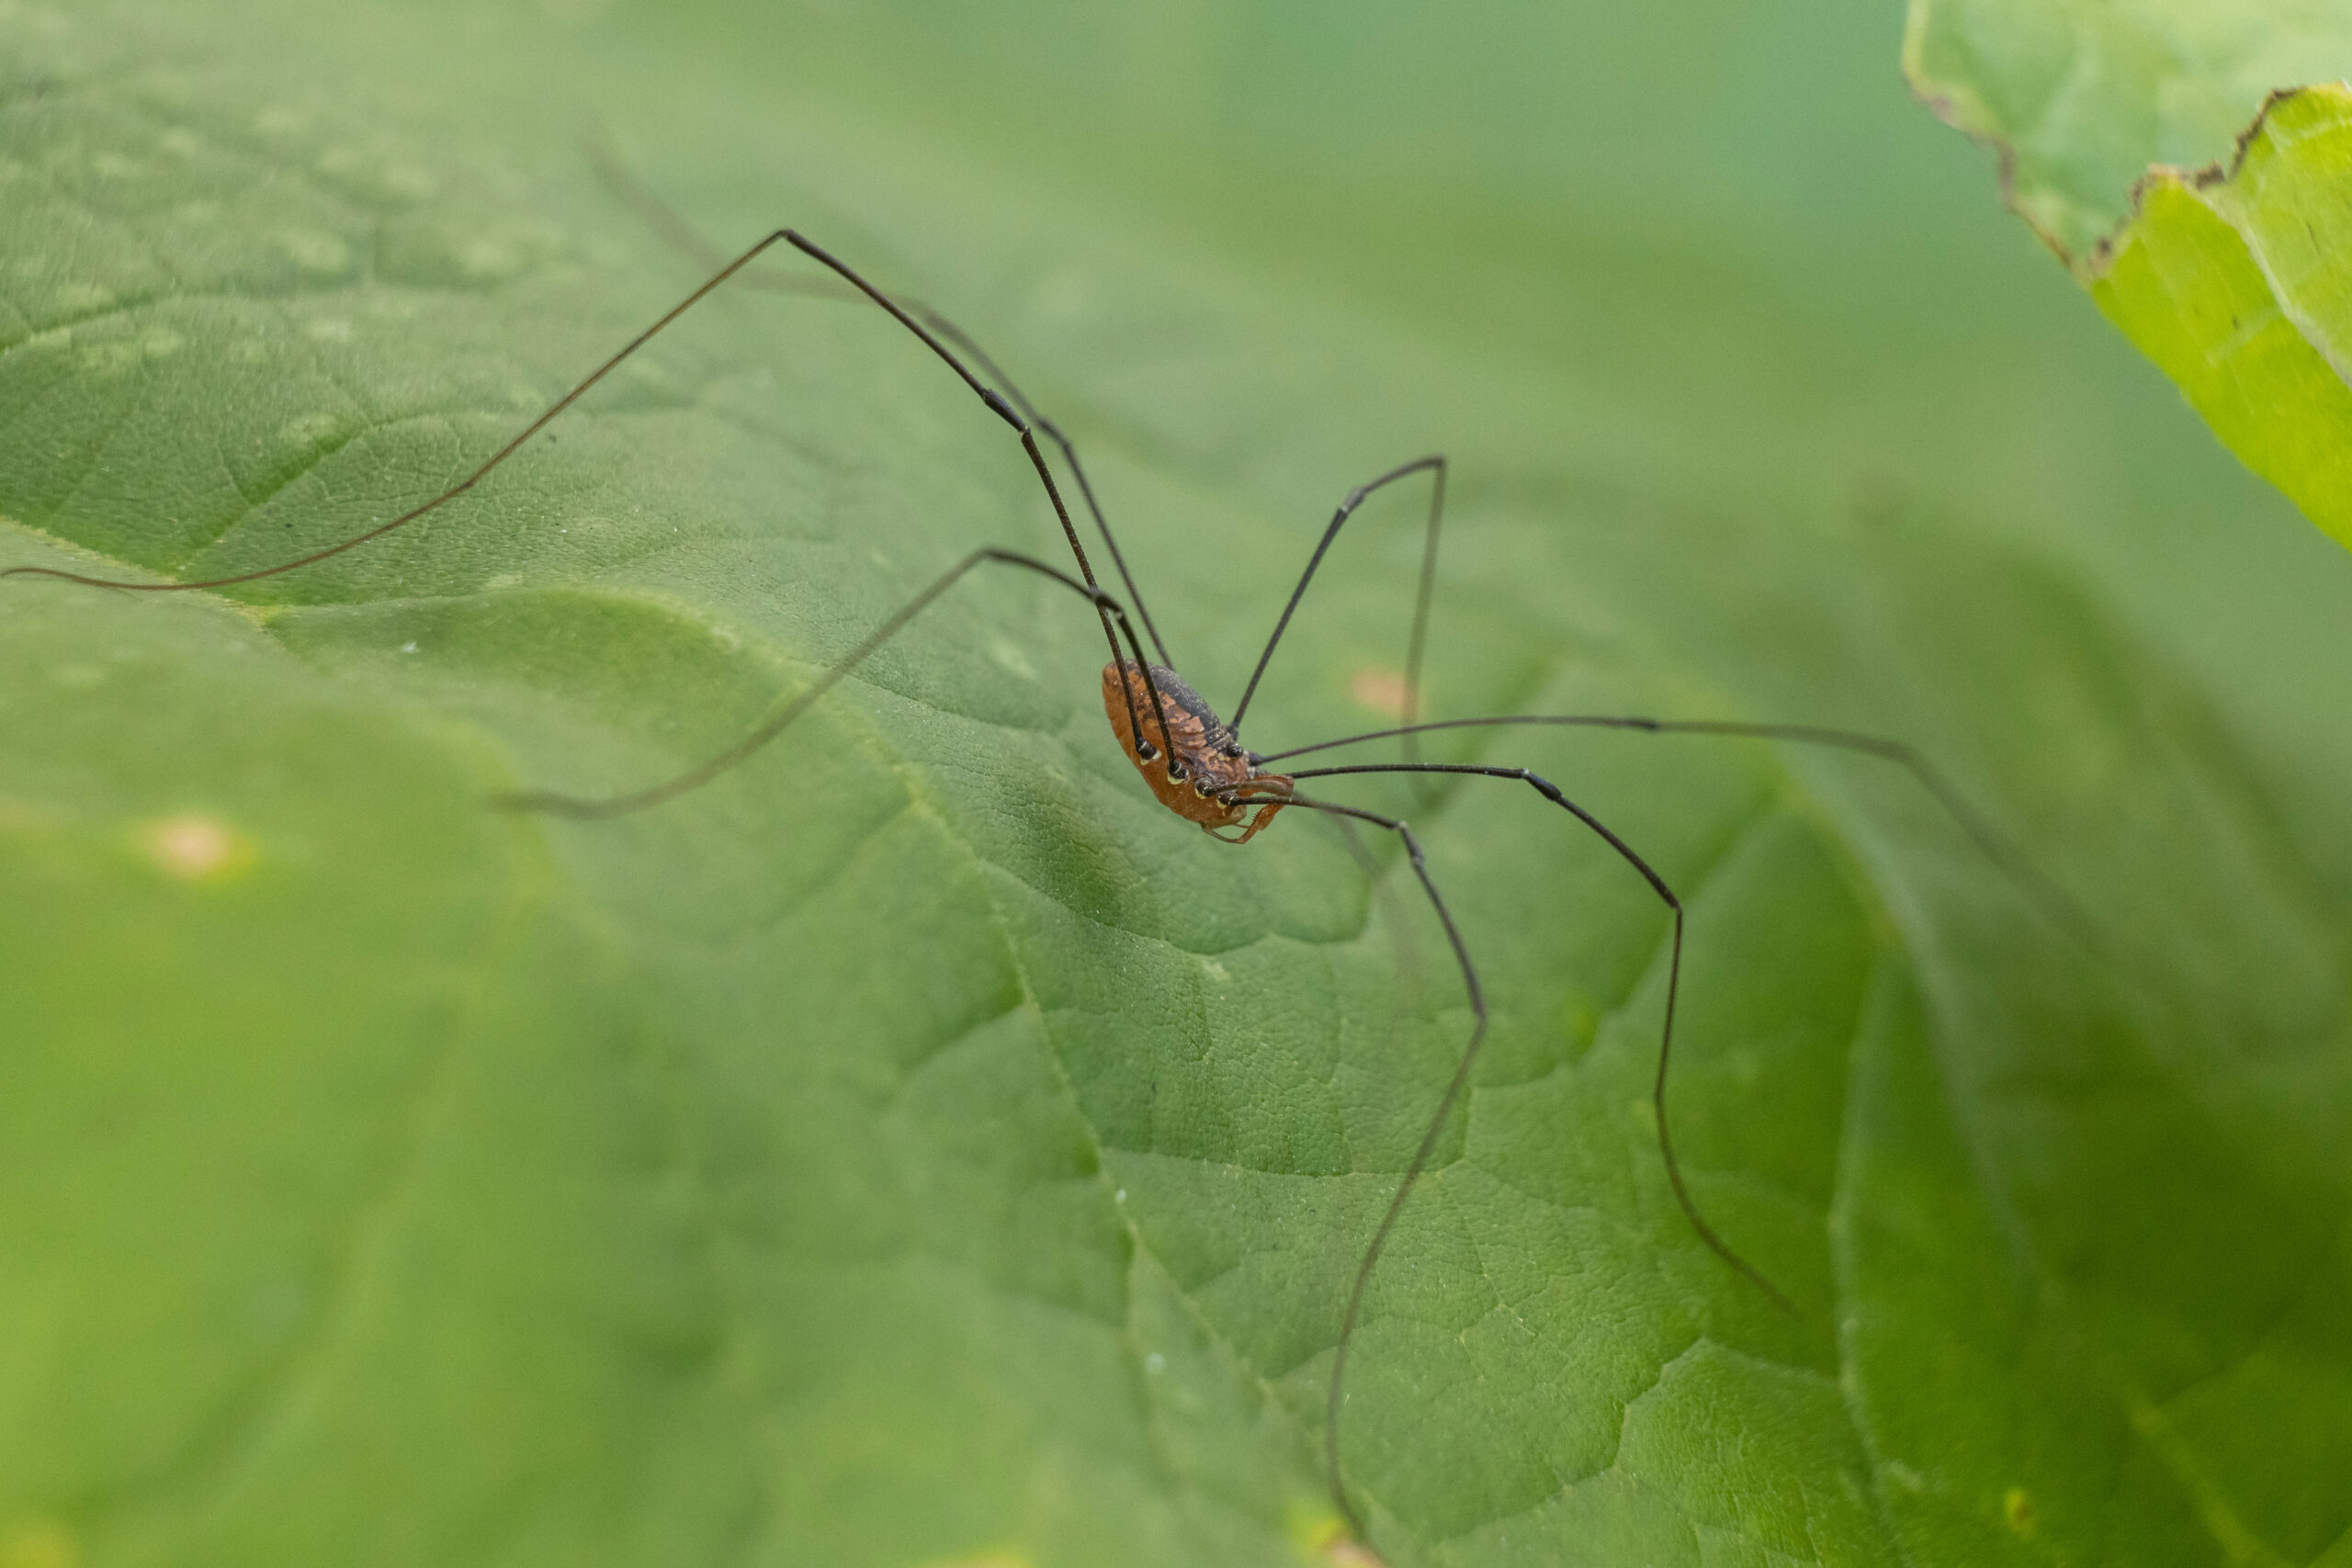 Close-up of a harmless cellar spider, or “daddy long legs” on a leaf